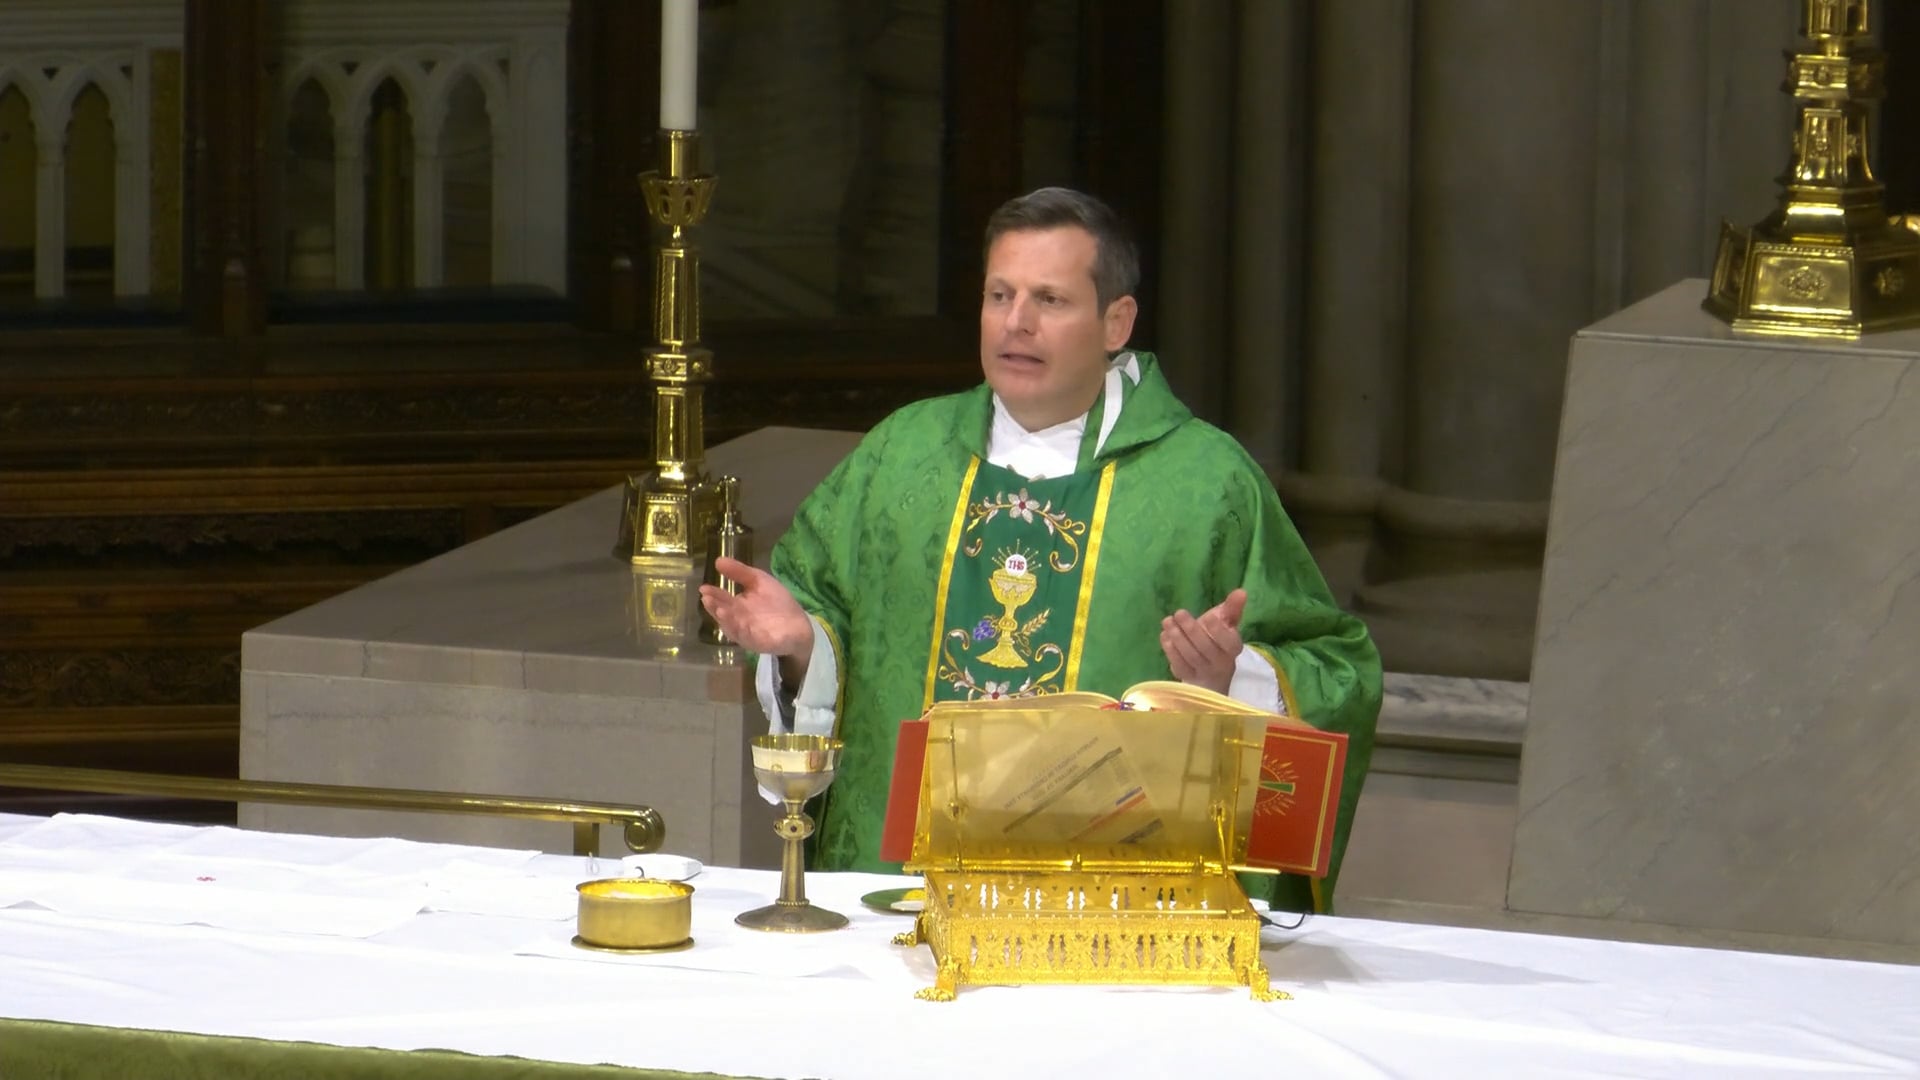 Mass from St. Patrick's Cathedral - January 30, 2023